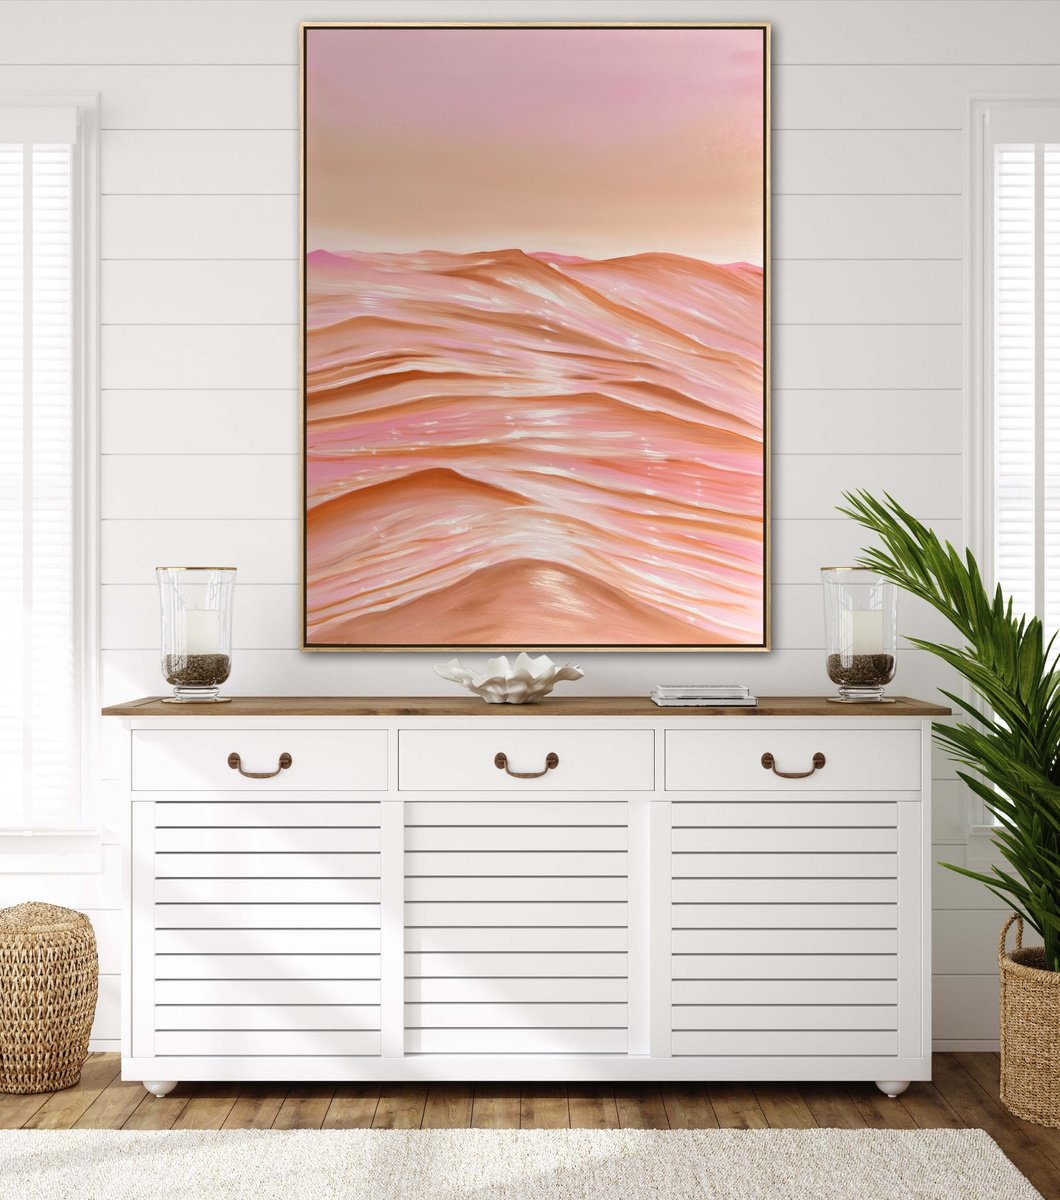 With all my love, large coastal ocean seascape brown and pink painting alanah jarvis by Alanah Jarvis